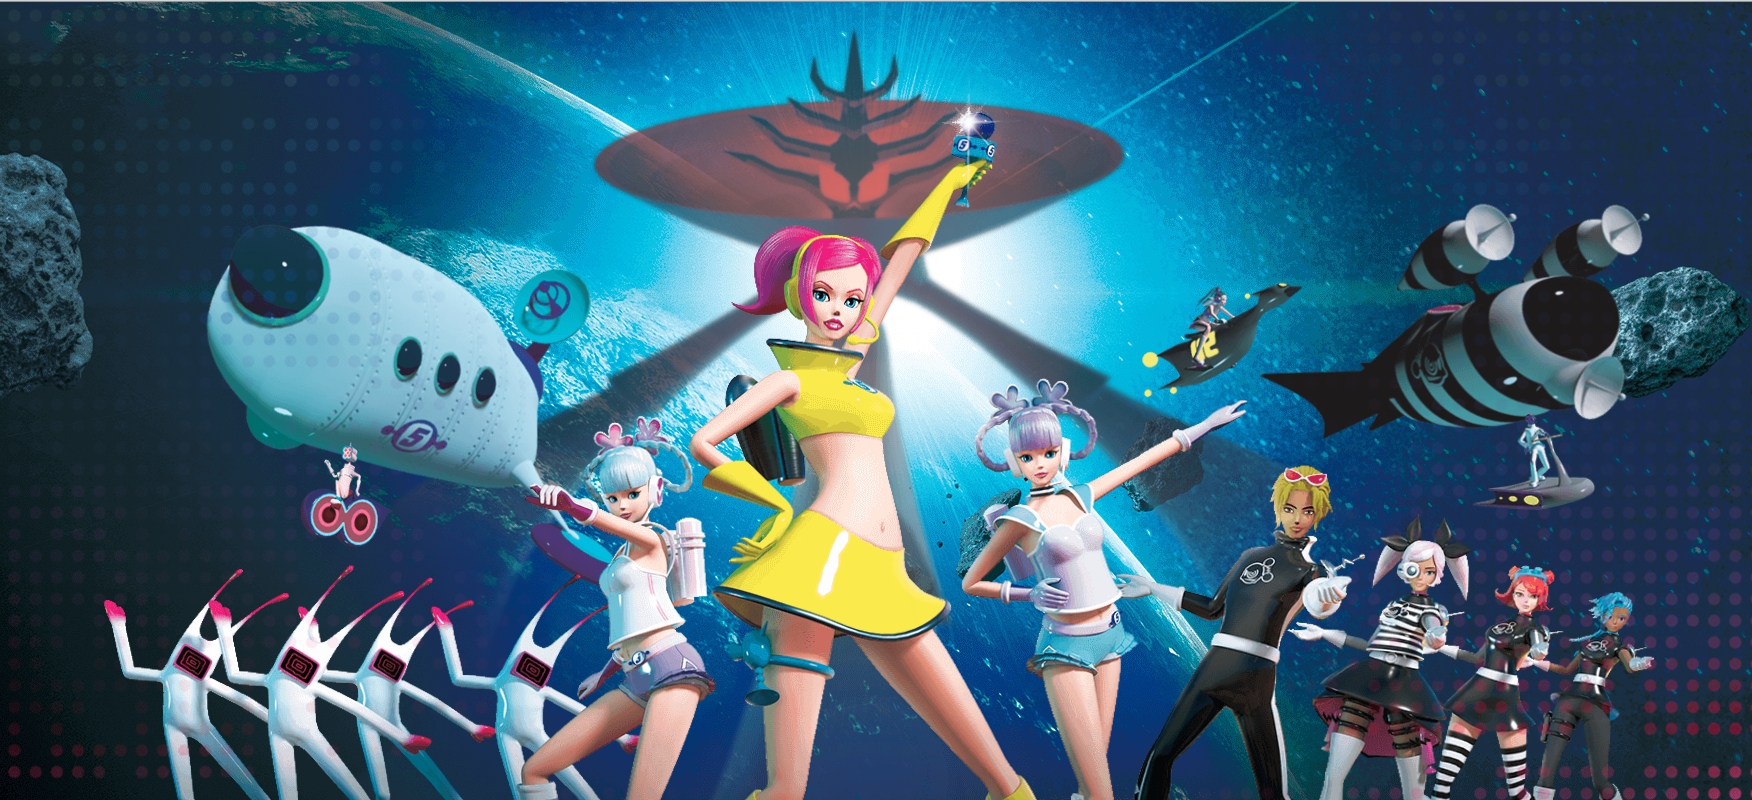 Space Channel 5: Kinda Funky News Flash Rolls Out With Full Force For Powerful PlayStation VR